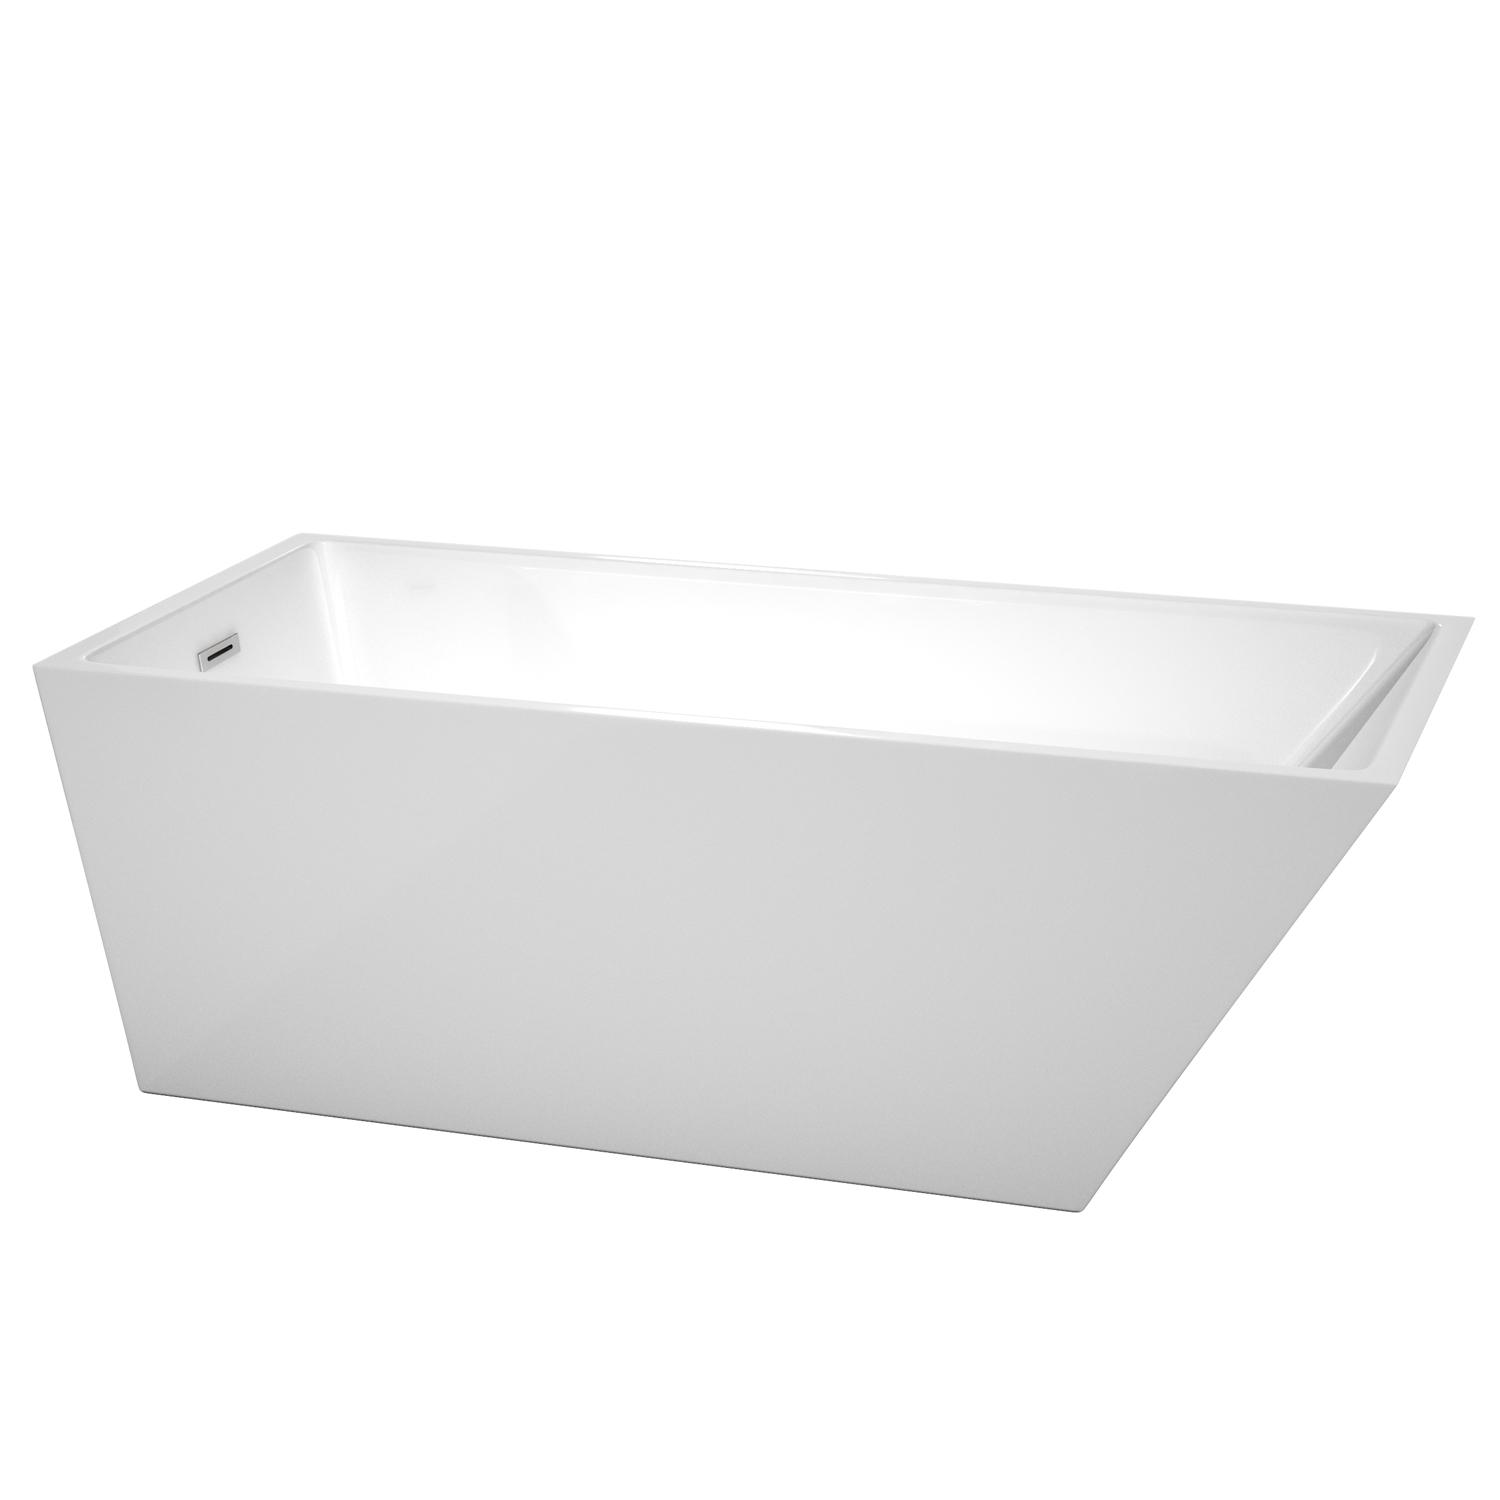 67" Freestanding Bathtub in White with Polished Chrome Drain and Overflow Trim with Faucet Options